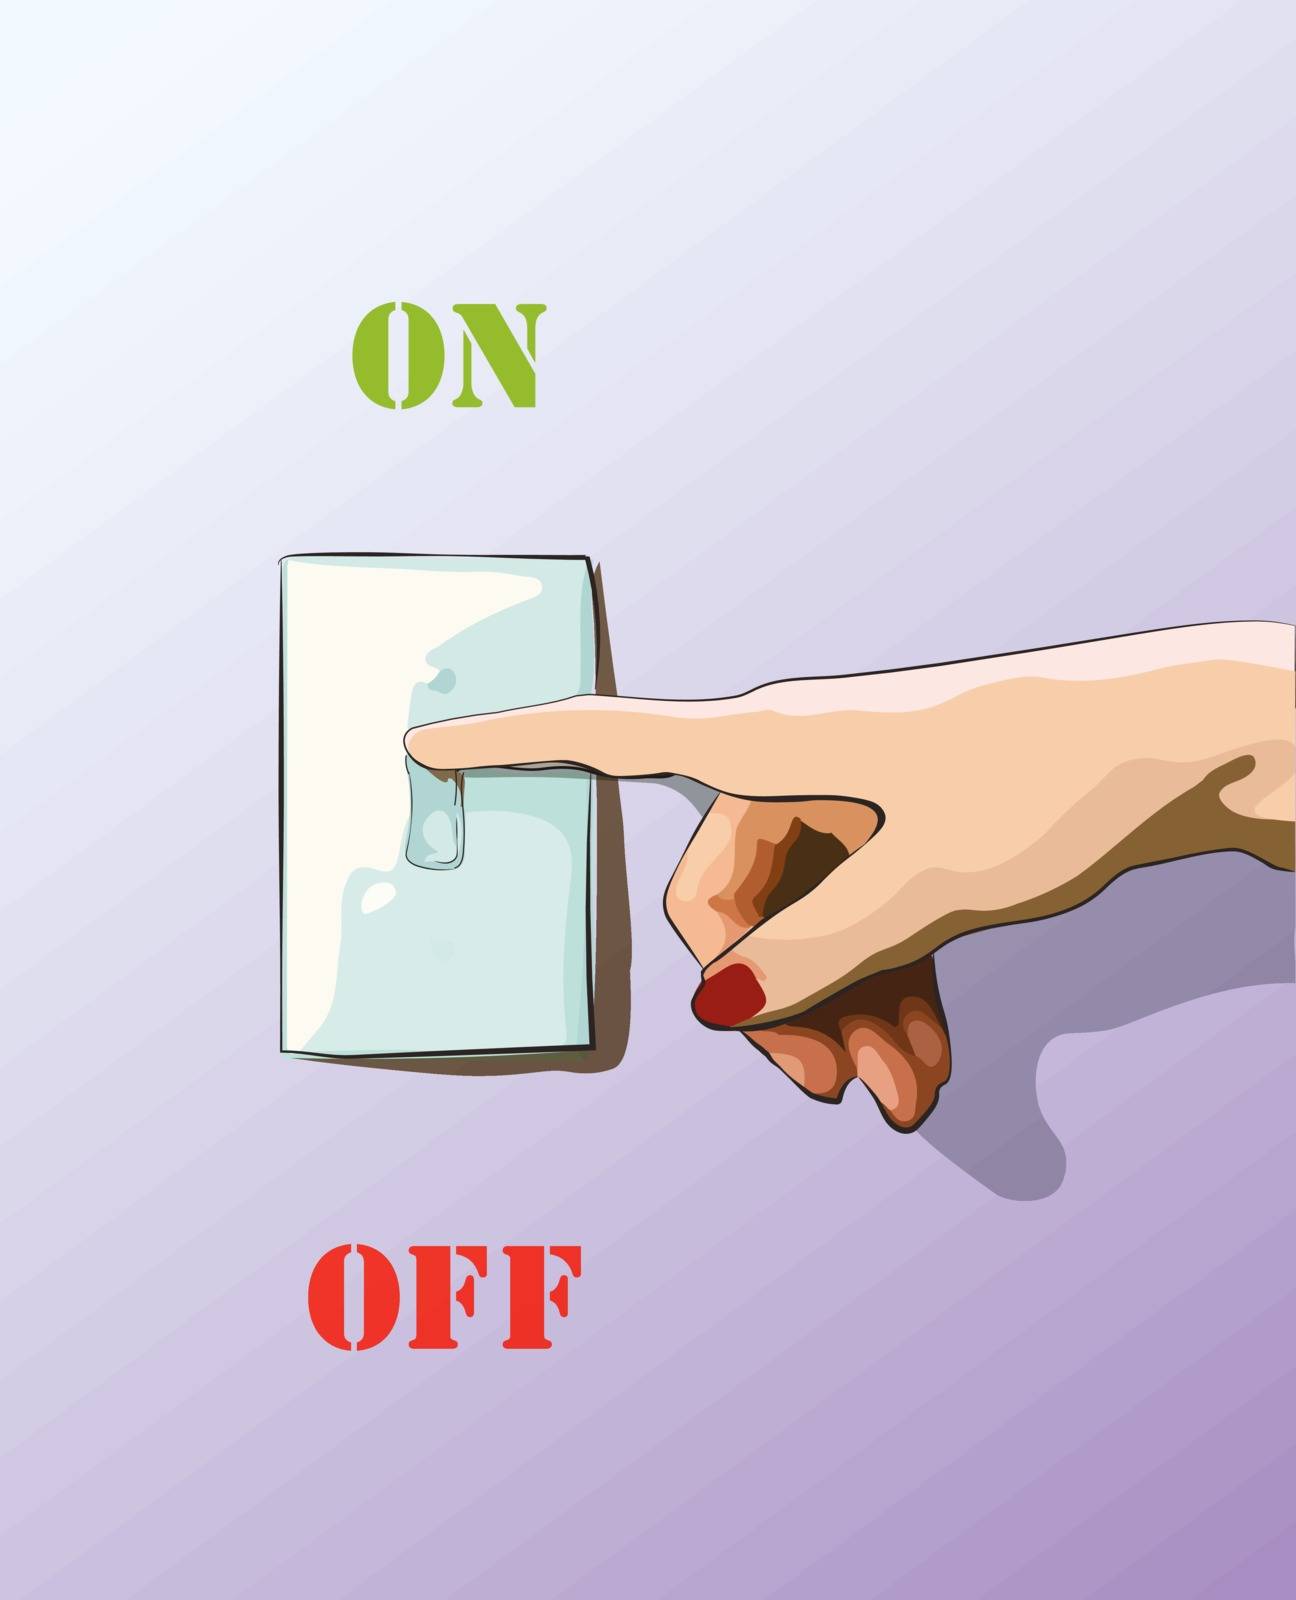 Turn off toggle style electric light wall switch. Conserve energy. Vector illustration